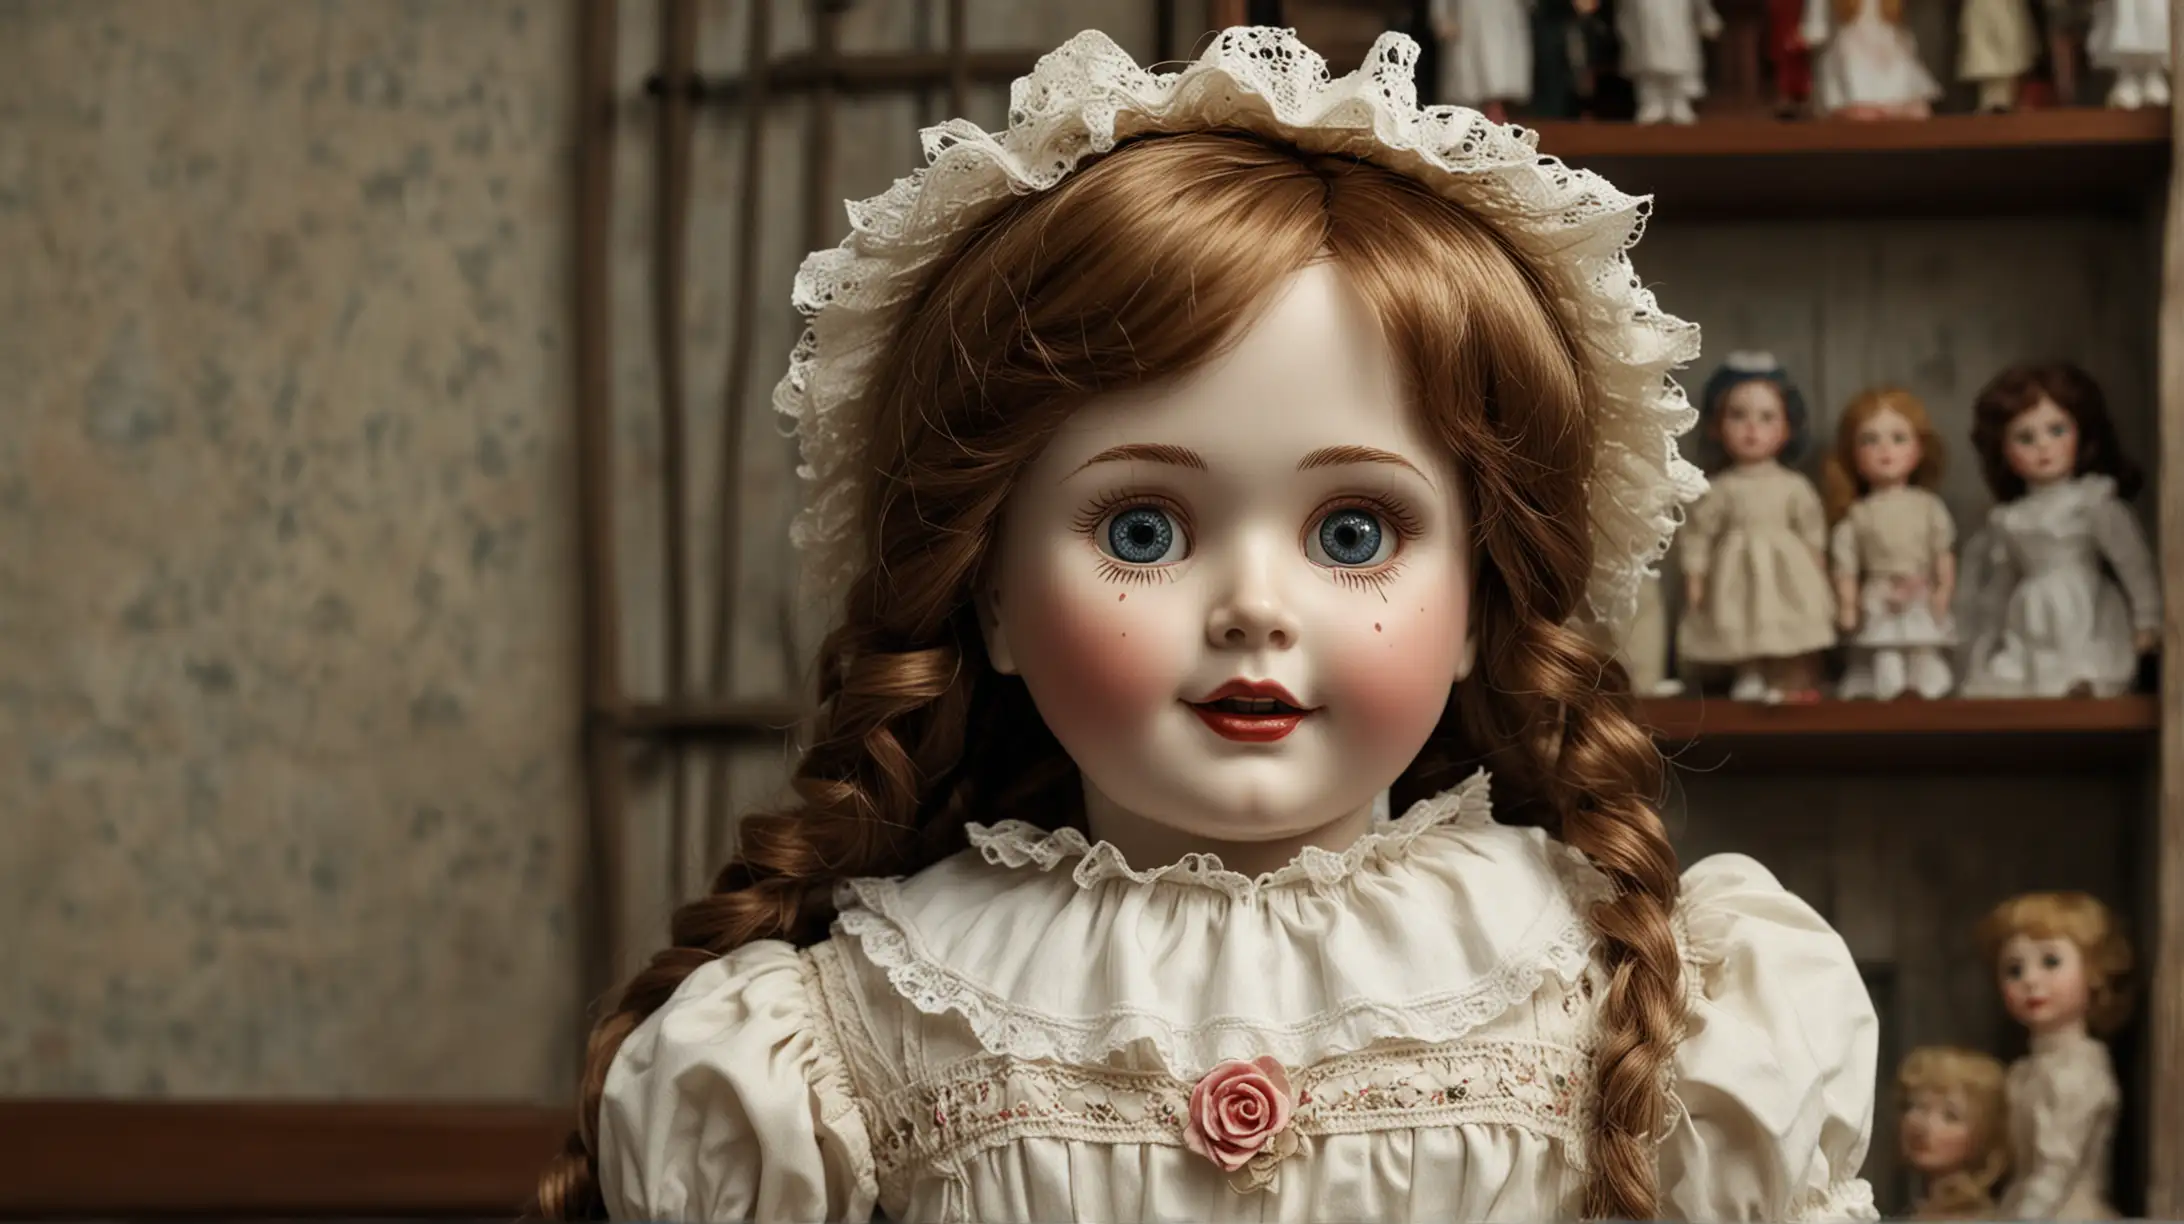 In a small town, an antique shop held a porcelain doll named Annabelle, whose innocent appearance belied the malevolent entity within. 